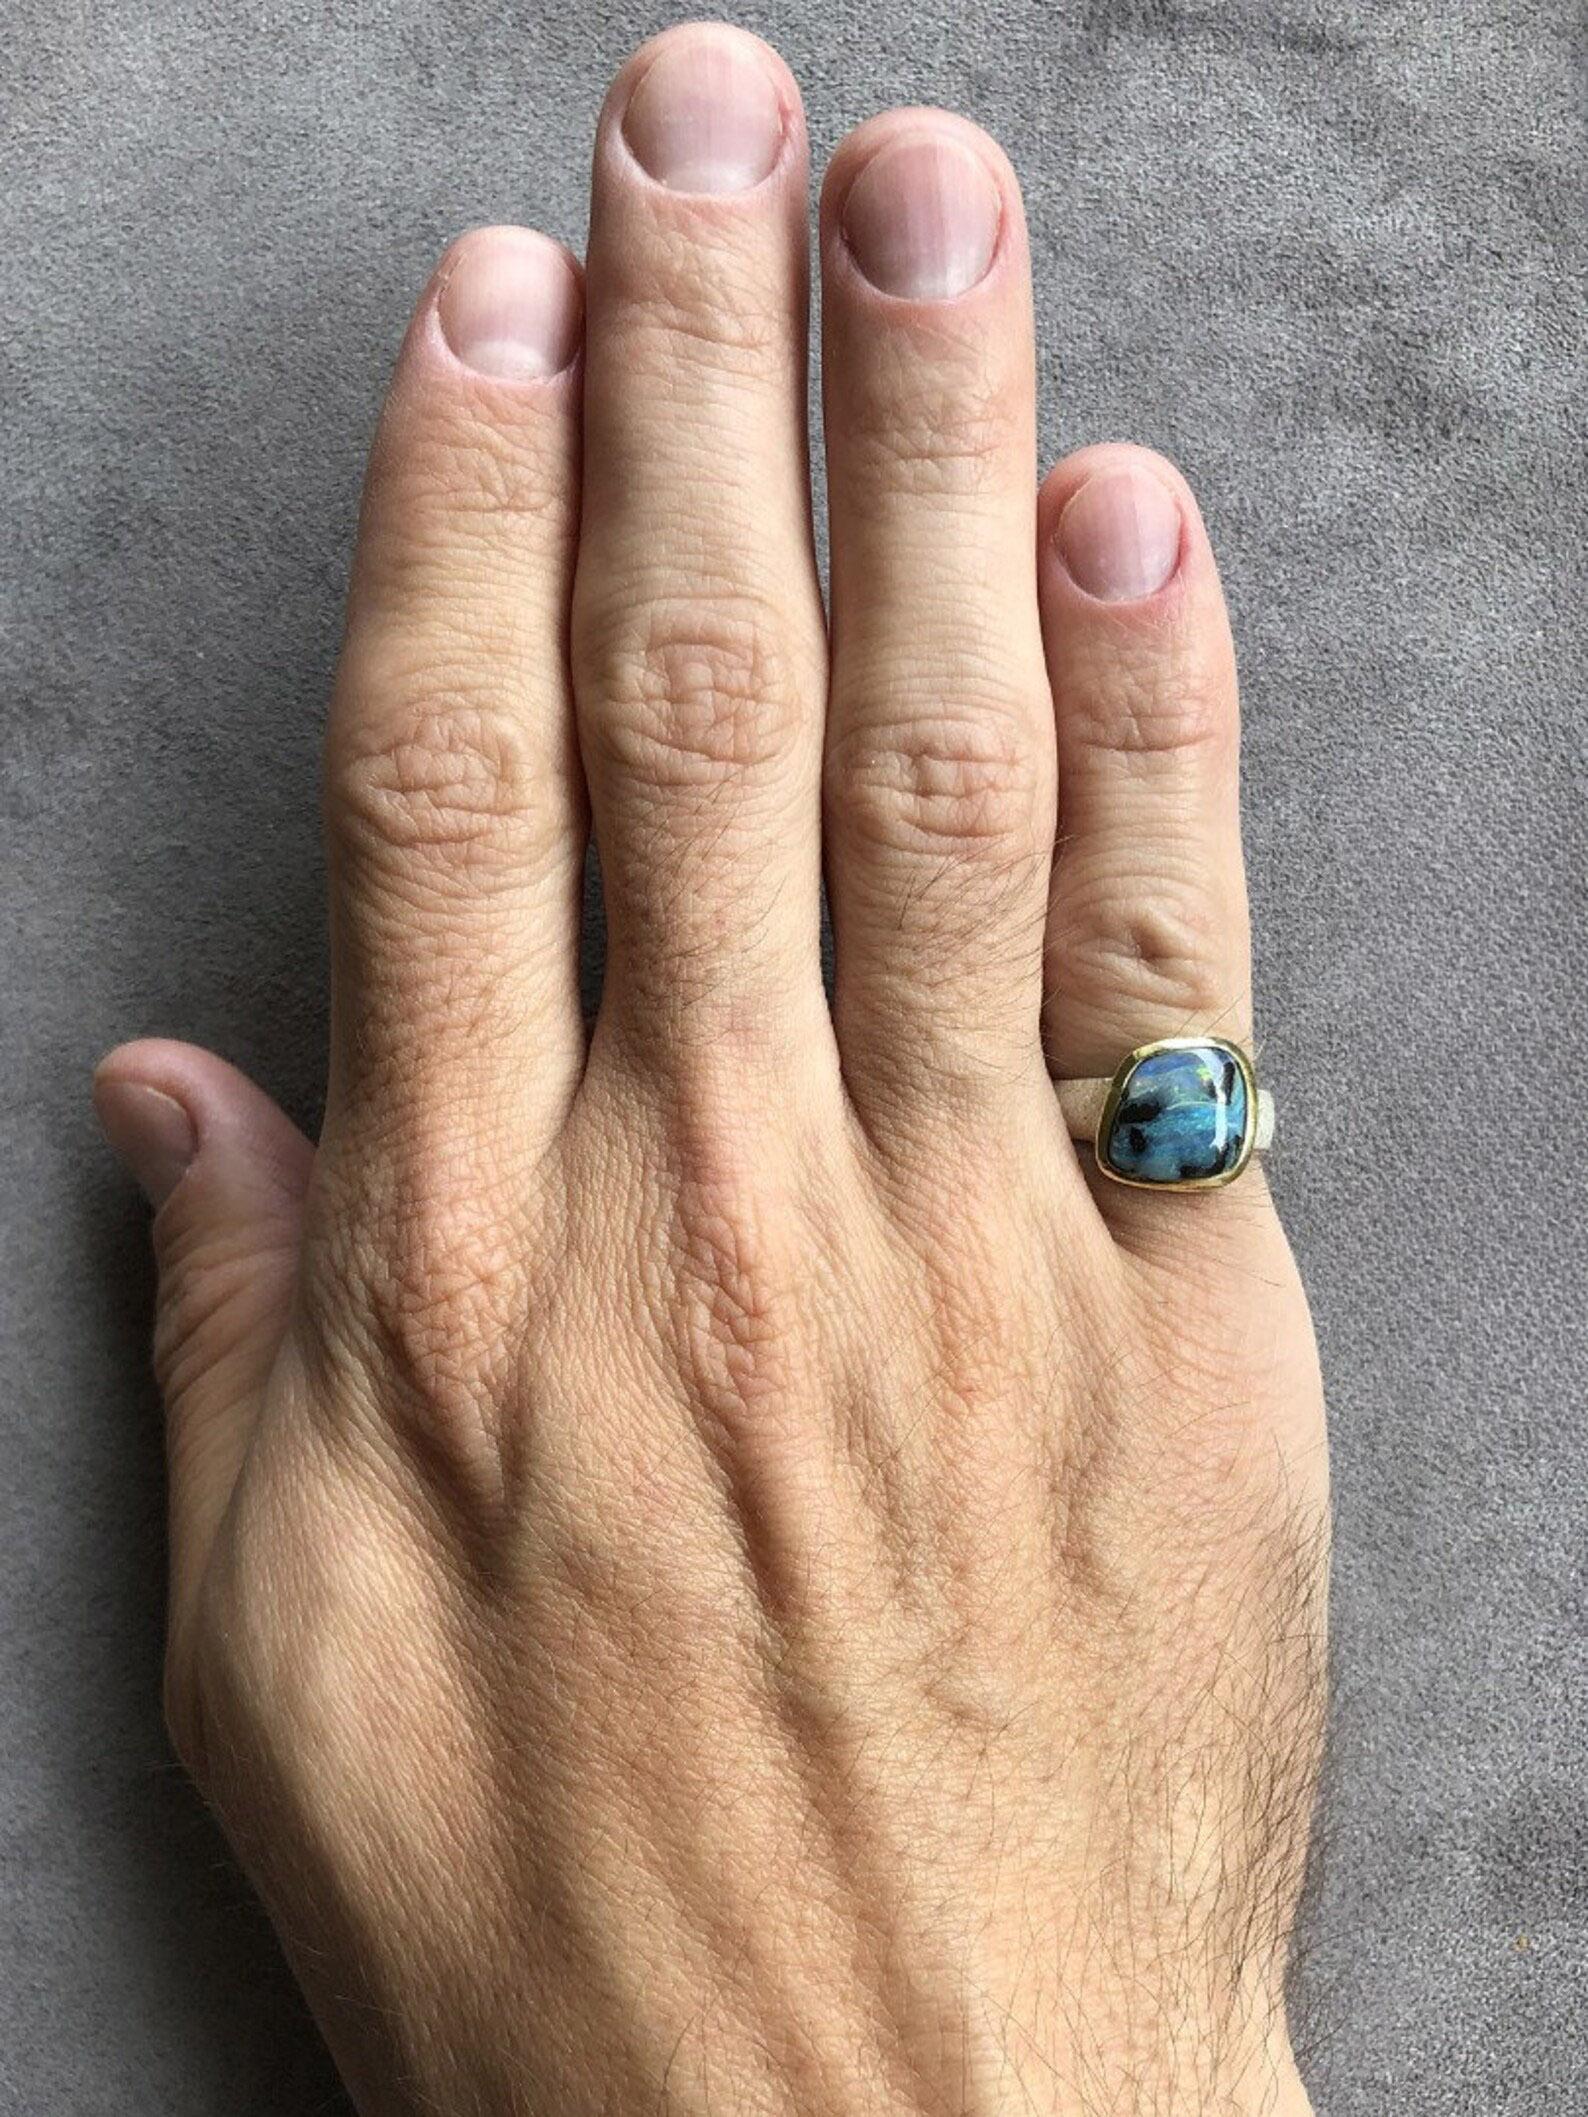 Artist Opal Silver Ring Gold Plated Blue Natural special person gift For Sale